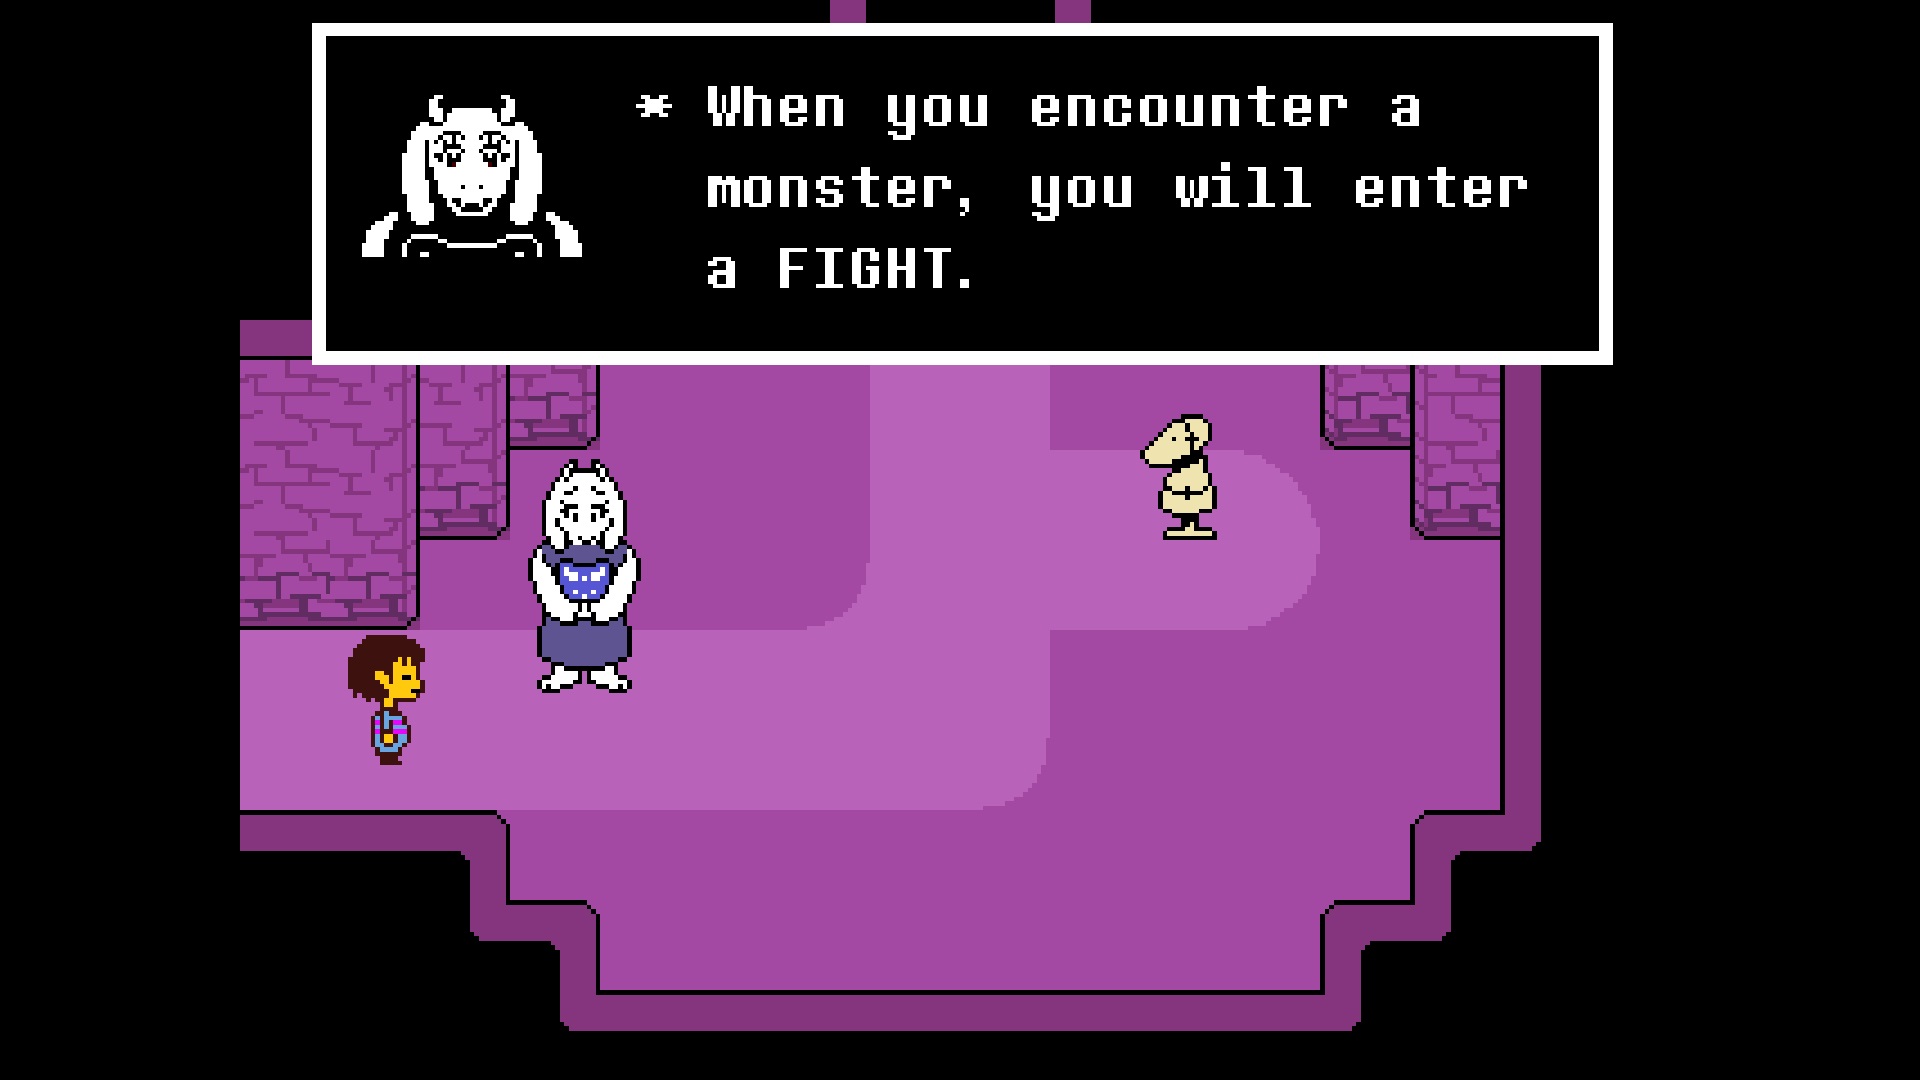 wd-v1-3-full prompt: Undertale Chara, holdi - PromptHero